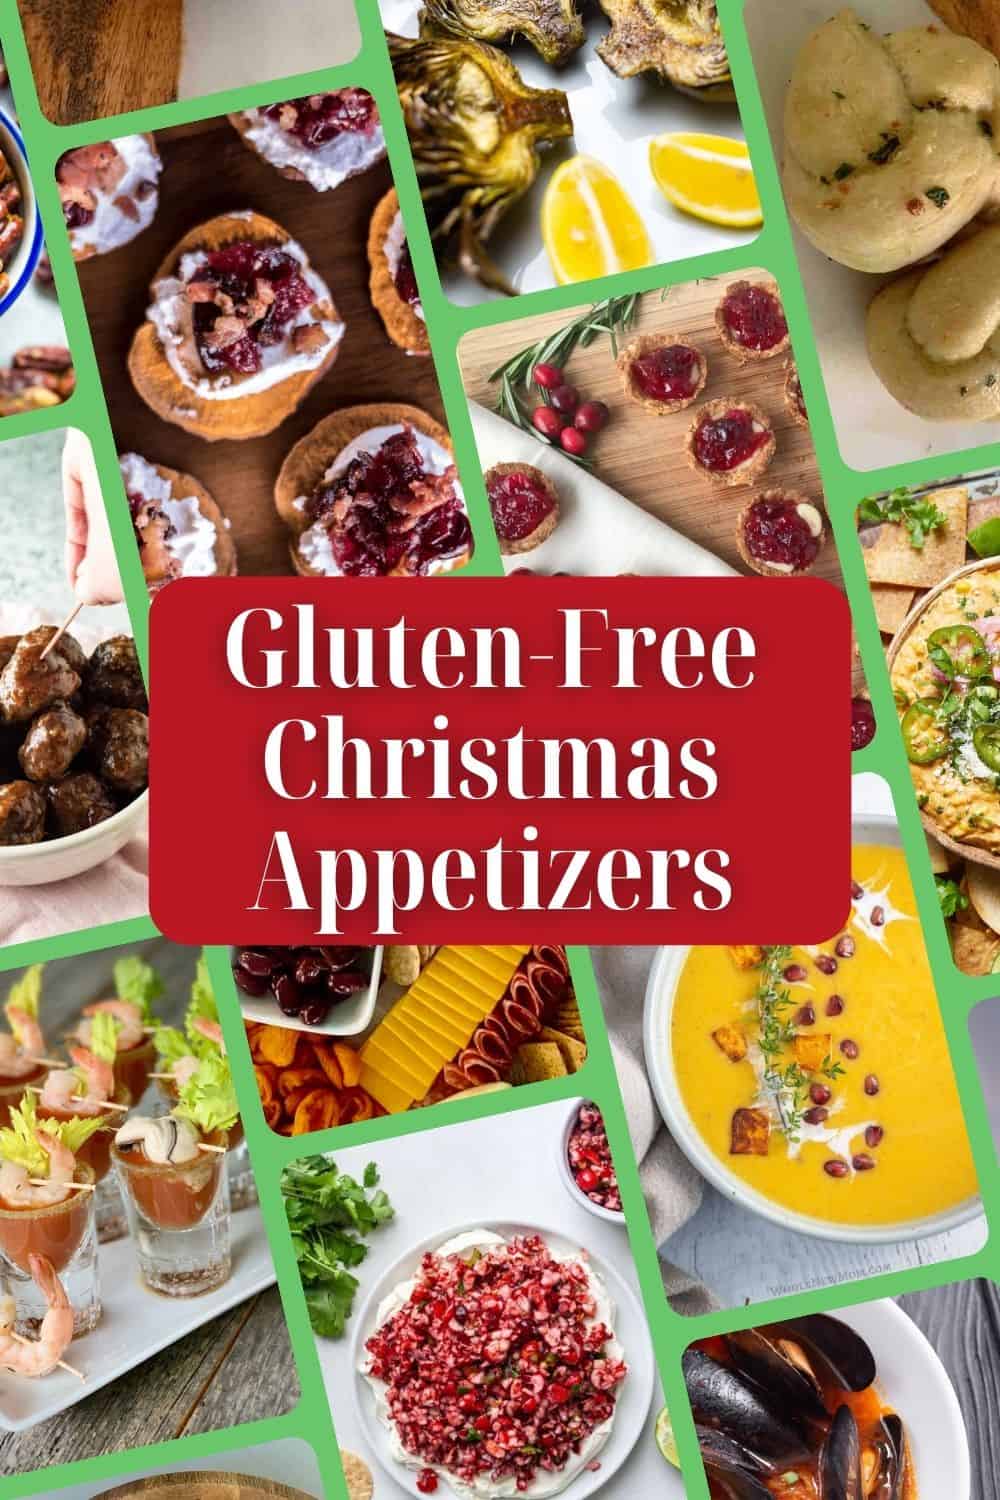 Red box with white text: Gluten-Free Christmas Appetizers, pics of appetizers in the background, starting with first row top to bottom then left to right: pecans, meatballs, Bloody Mary shrimp glasses, sweet potato goat cheese with cranberries, charcuterie display, cranberry salsa, artichokes with lemons, cranberry tarts, butternut squash soup with rosemary and pomegranates, mussels, garlic knots, cheesy elite dip topped with jalapeños